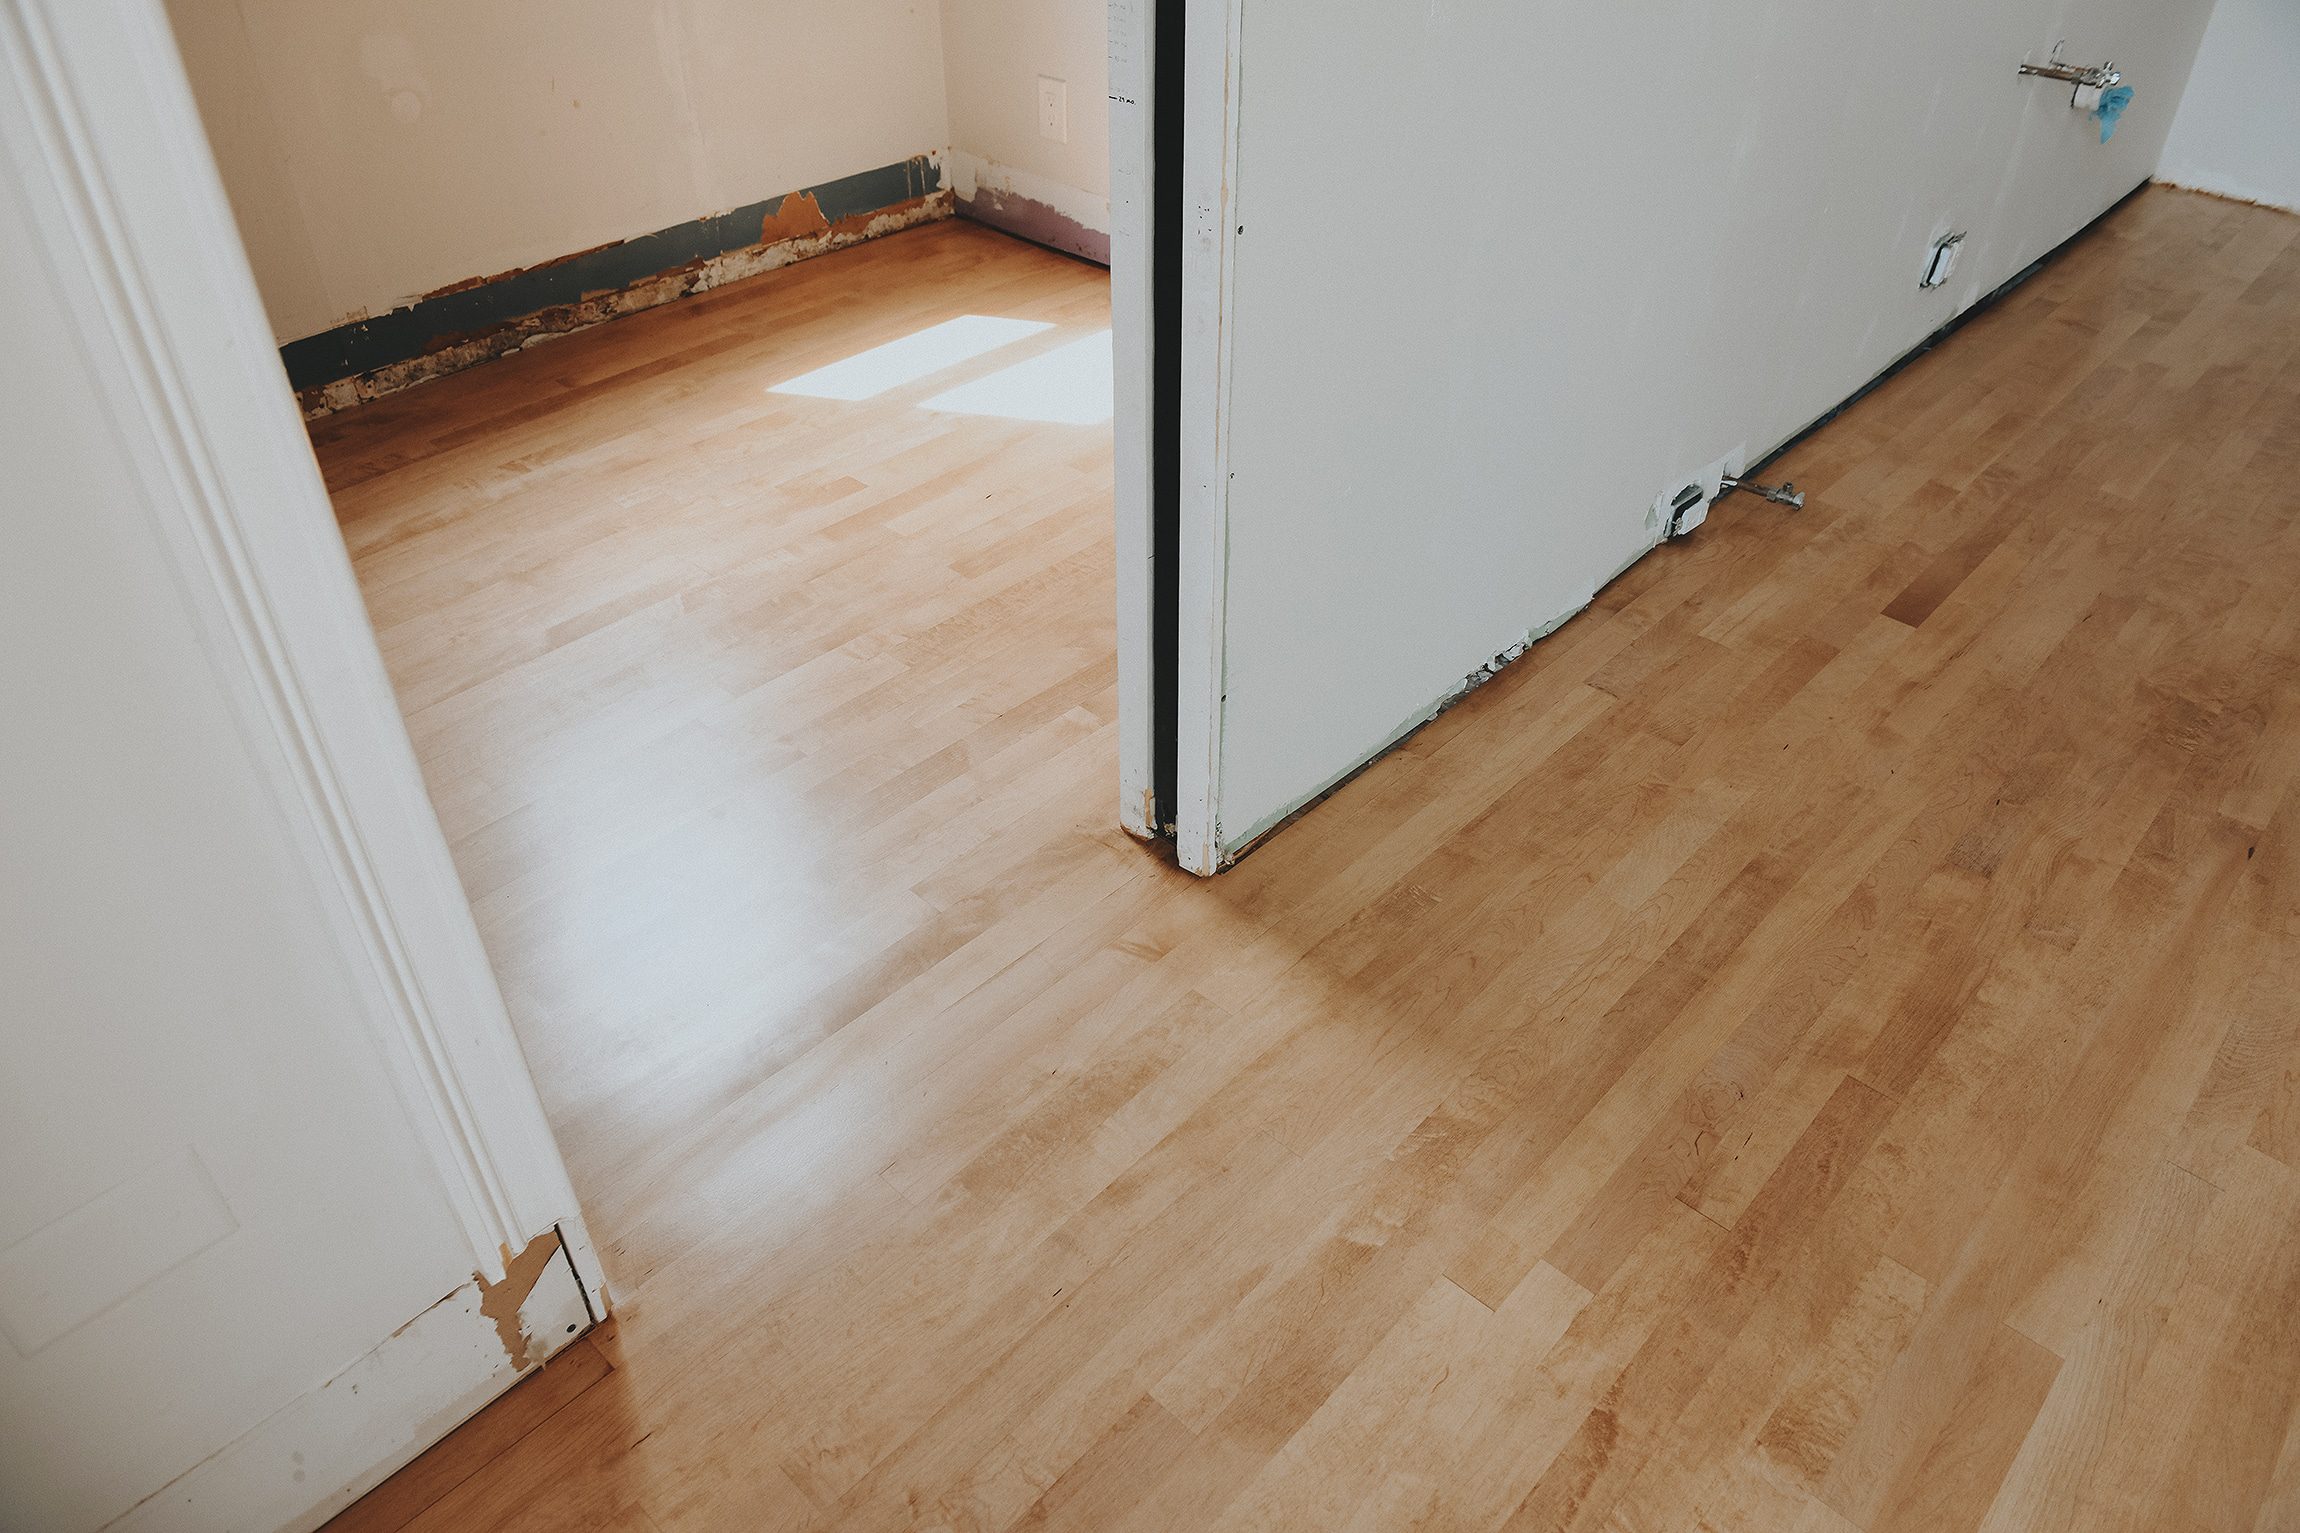 Transition of maple flooring from kitchen to workshop | via Yellow Brick Home